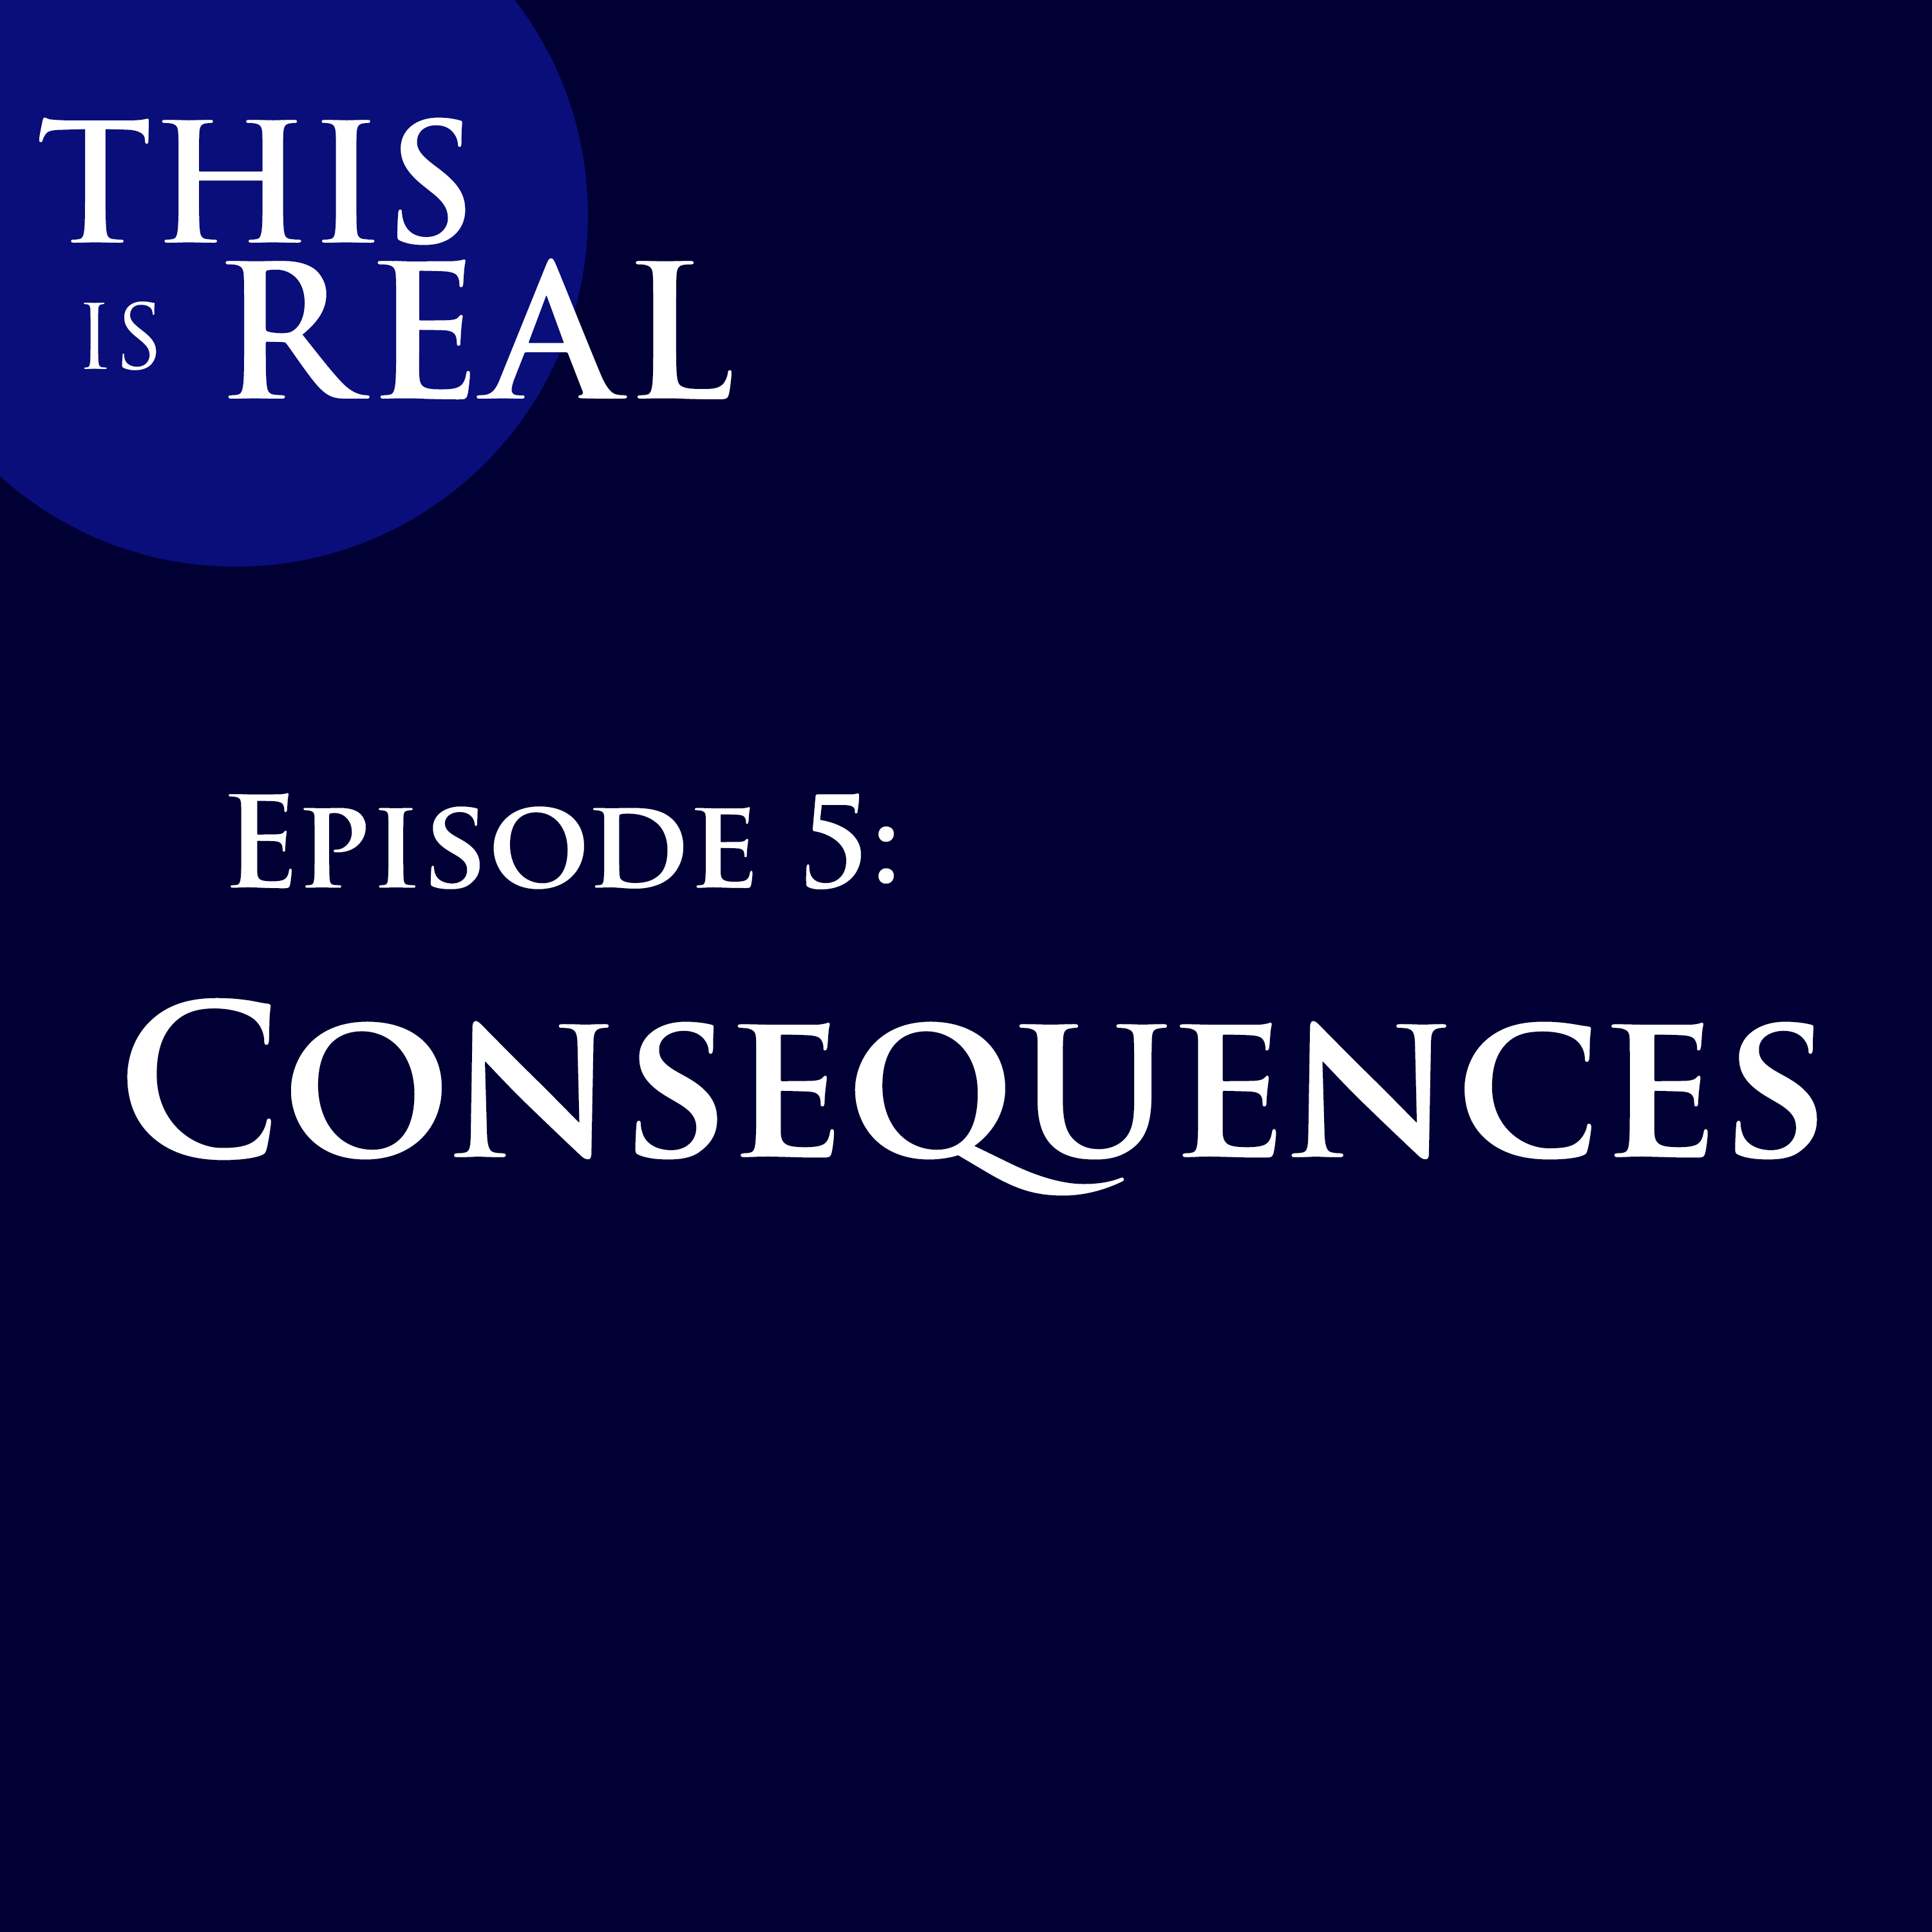 This is Real Episode 5: Consequences